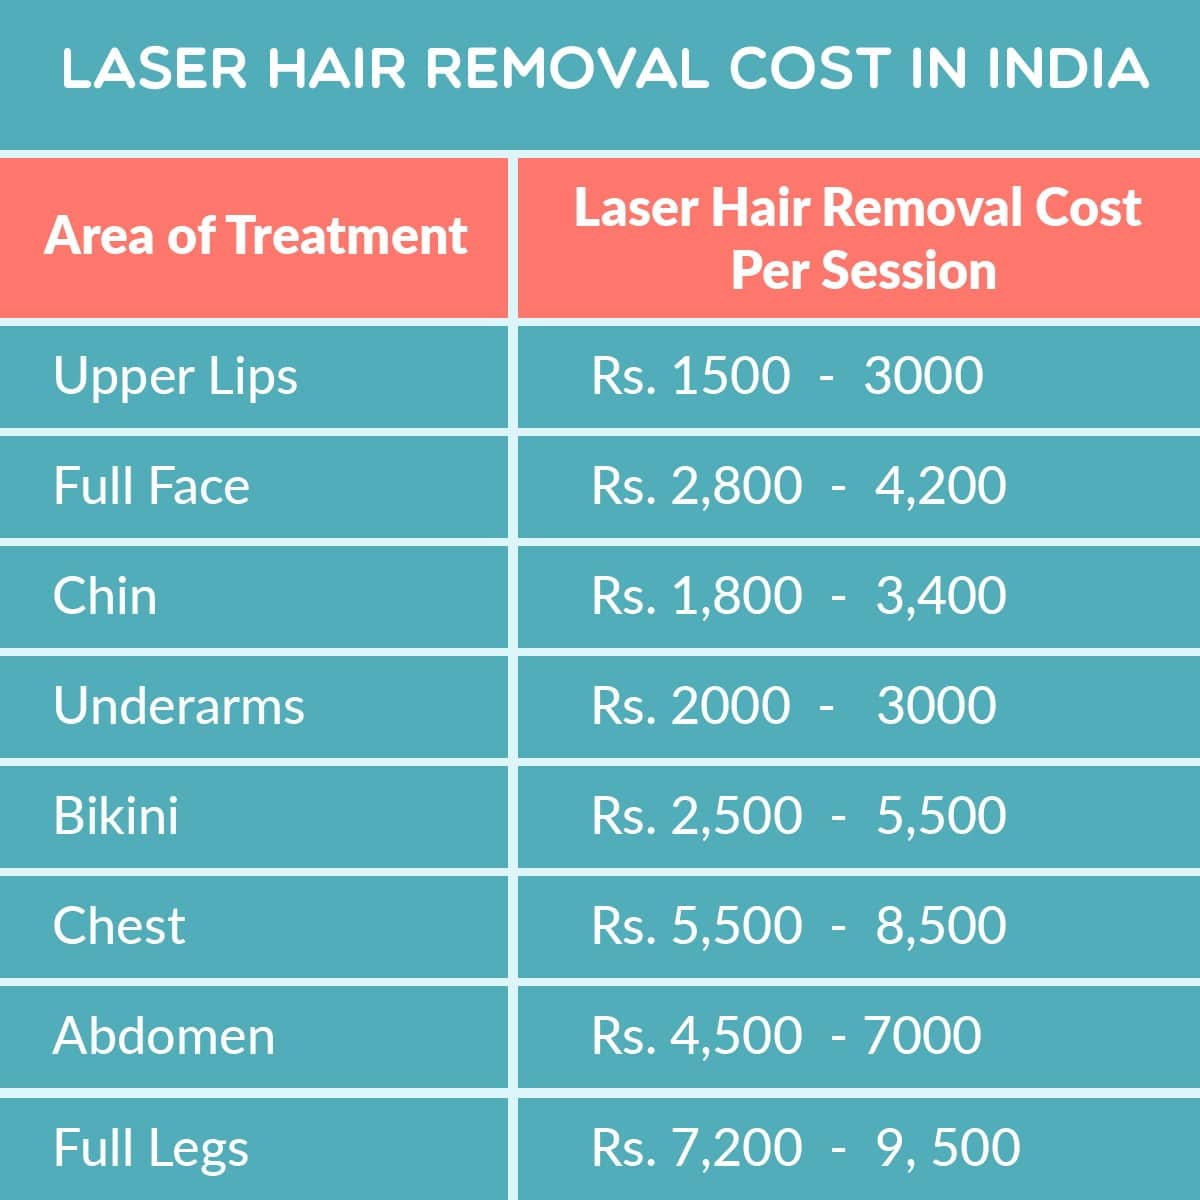 Laser Hair Removal Cost in India - Laser Hair Removal in India